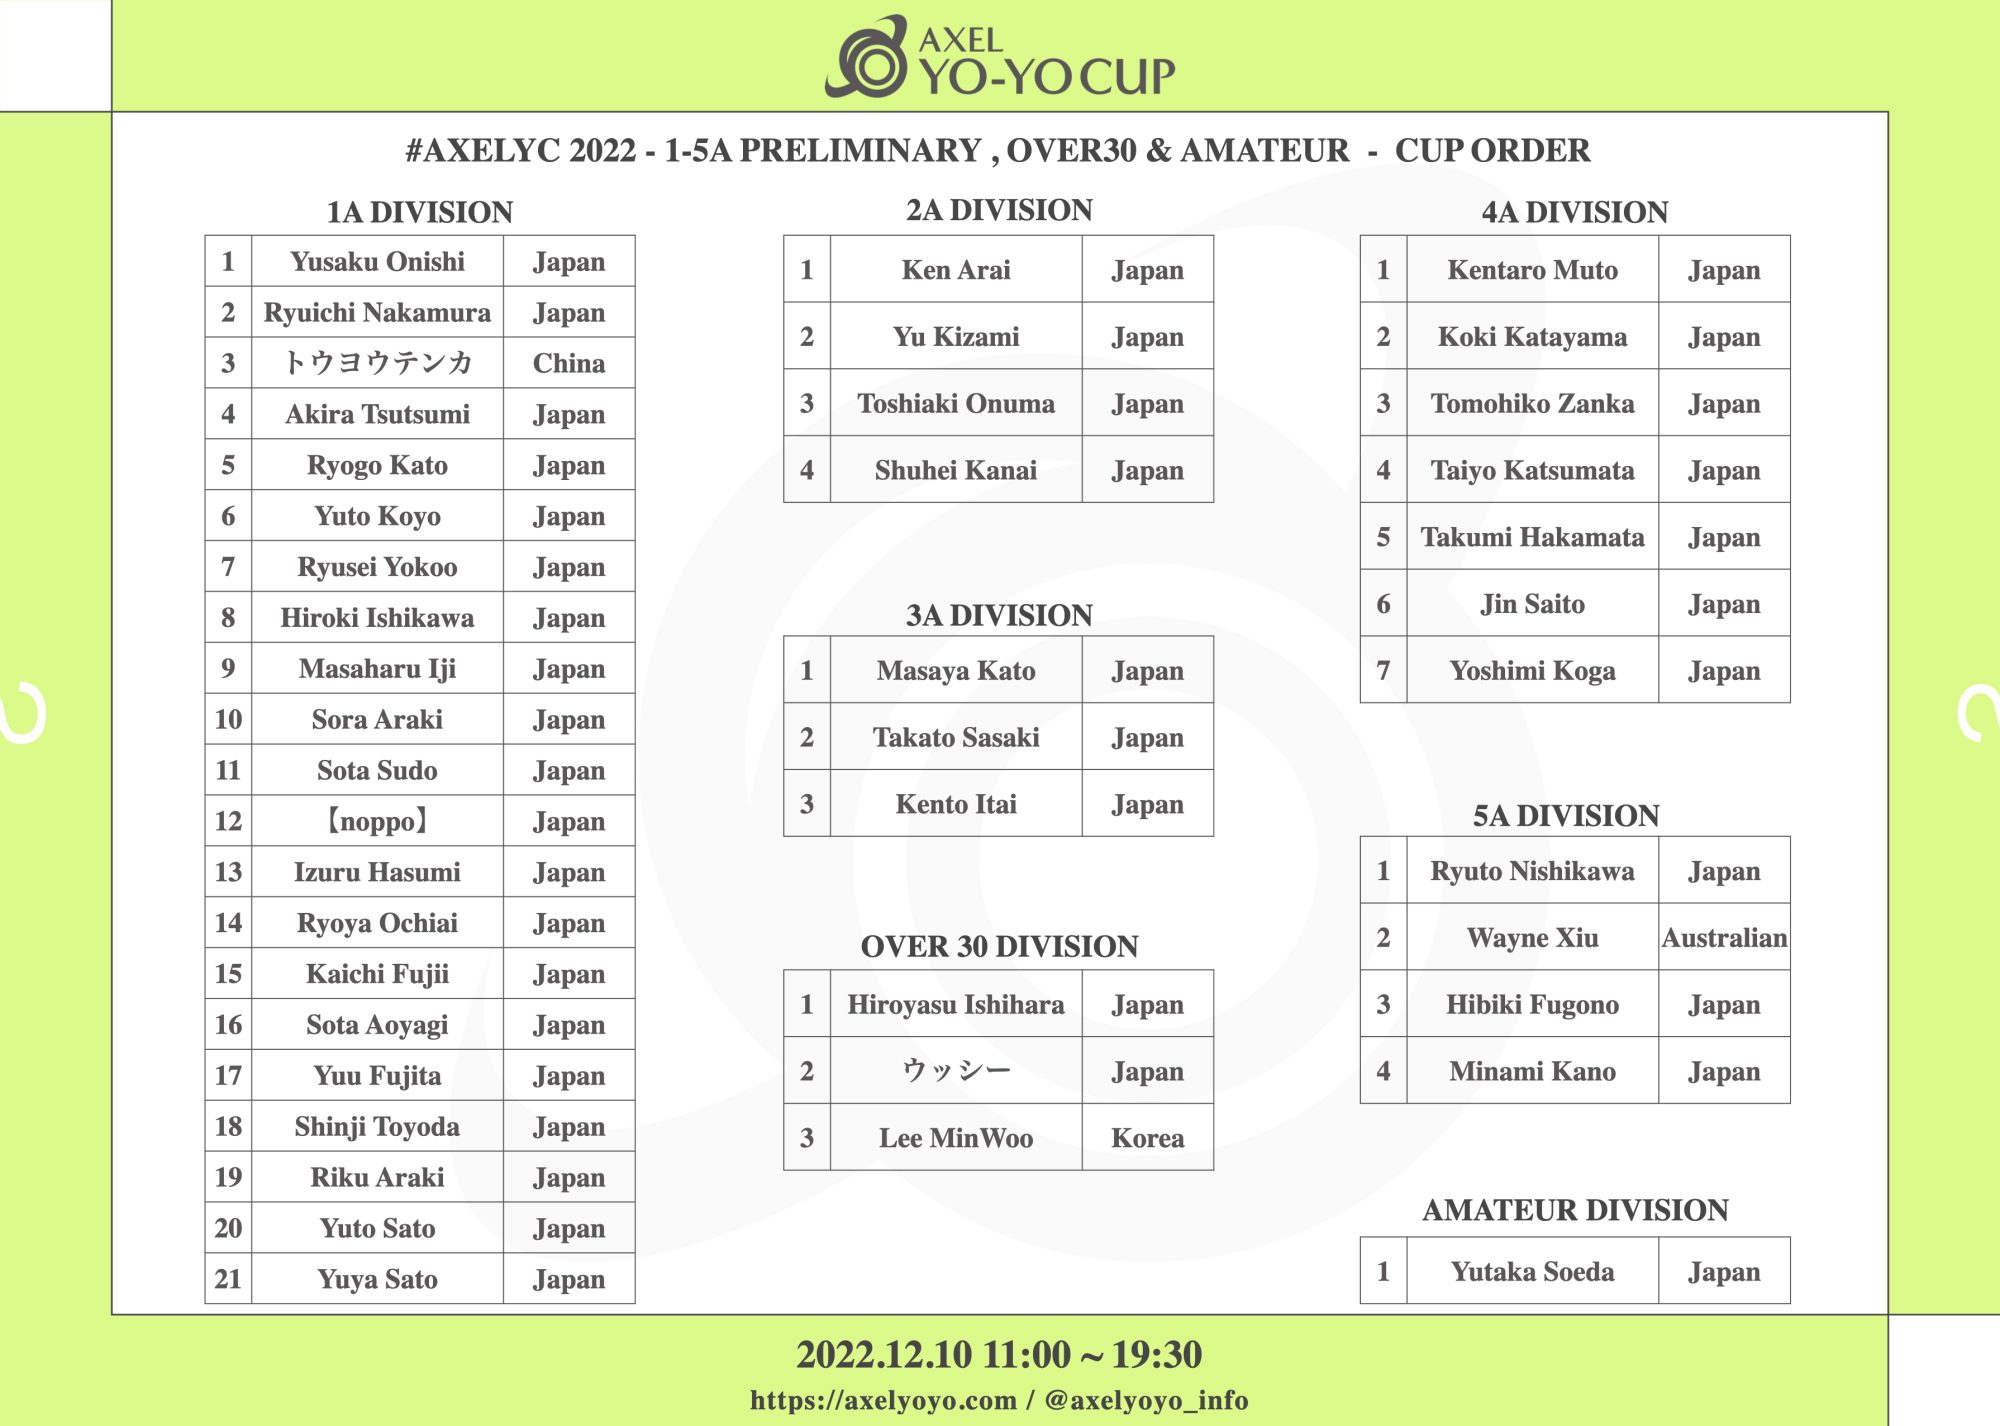 1-5A部門予選/Over30/Amateur演技順 発表！ / 1-5A DIVISIONS PRELIMINARY Over30/Amateur ORDER ANNOUNCED!